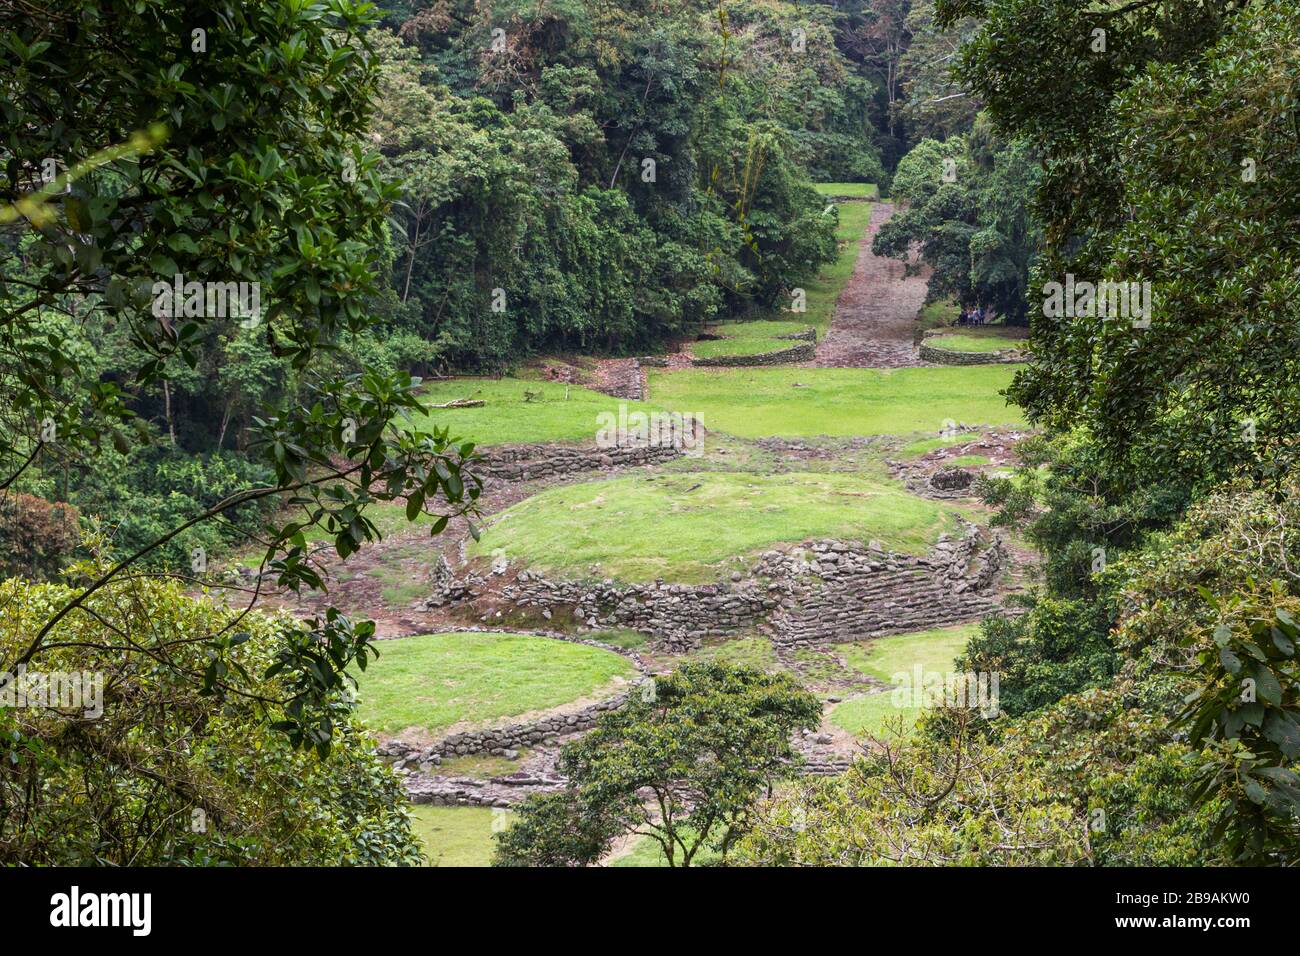 Ruins of an ancient civilization that thrived for over two thousand years in the mountains of Costa Rica, leaving behind stone work showing advanced k Stock Photo